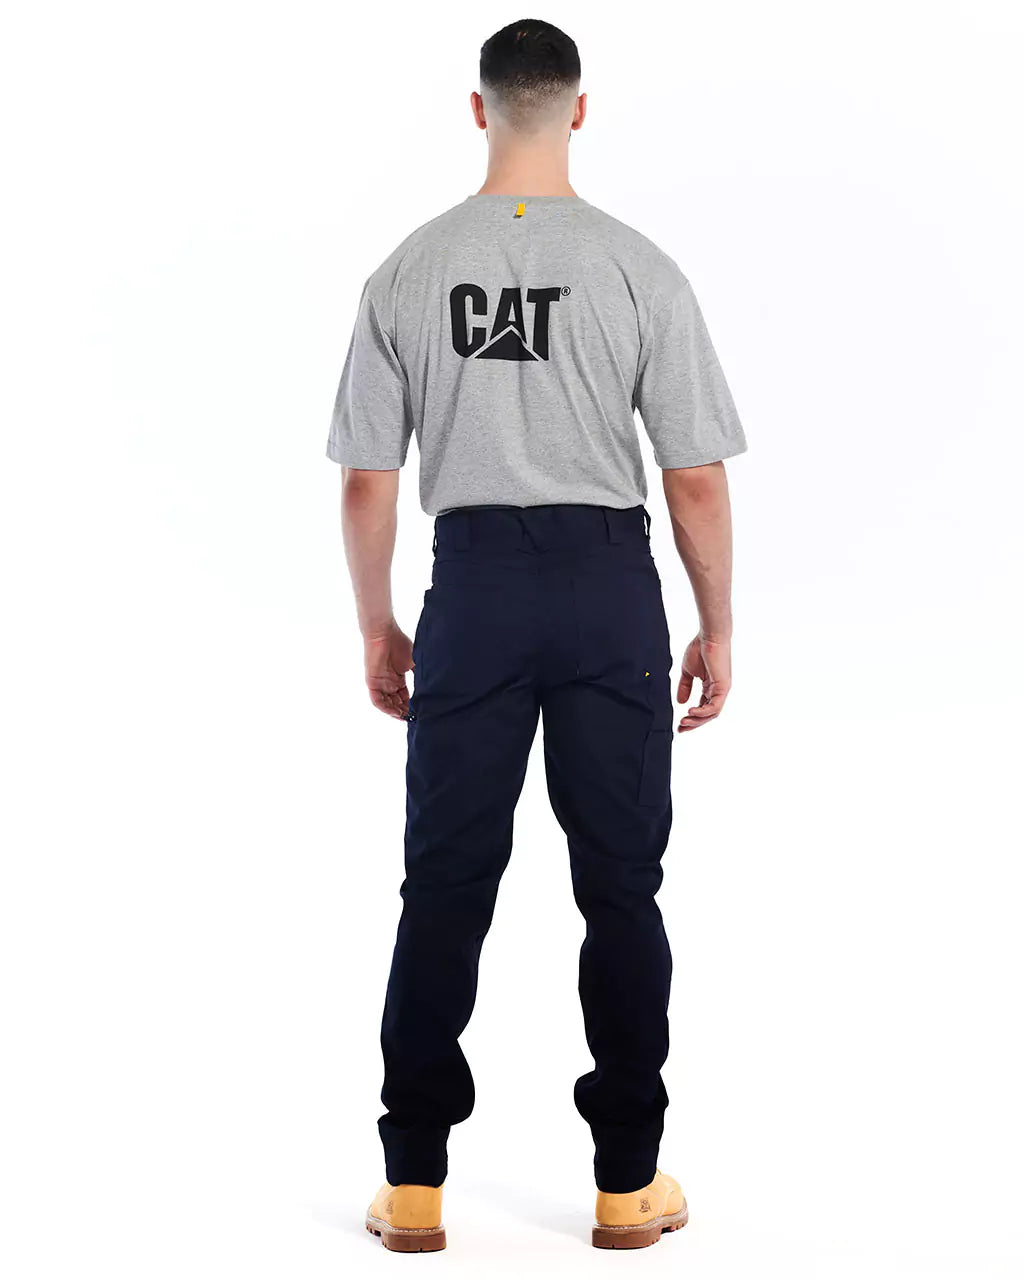 Men's technical trousers: technical pants and shorts